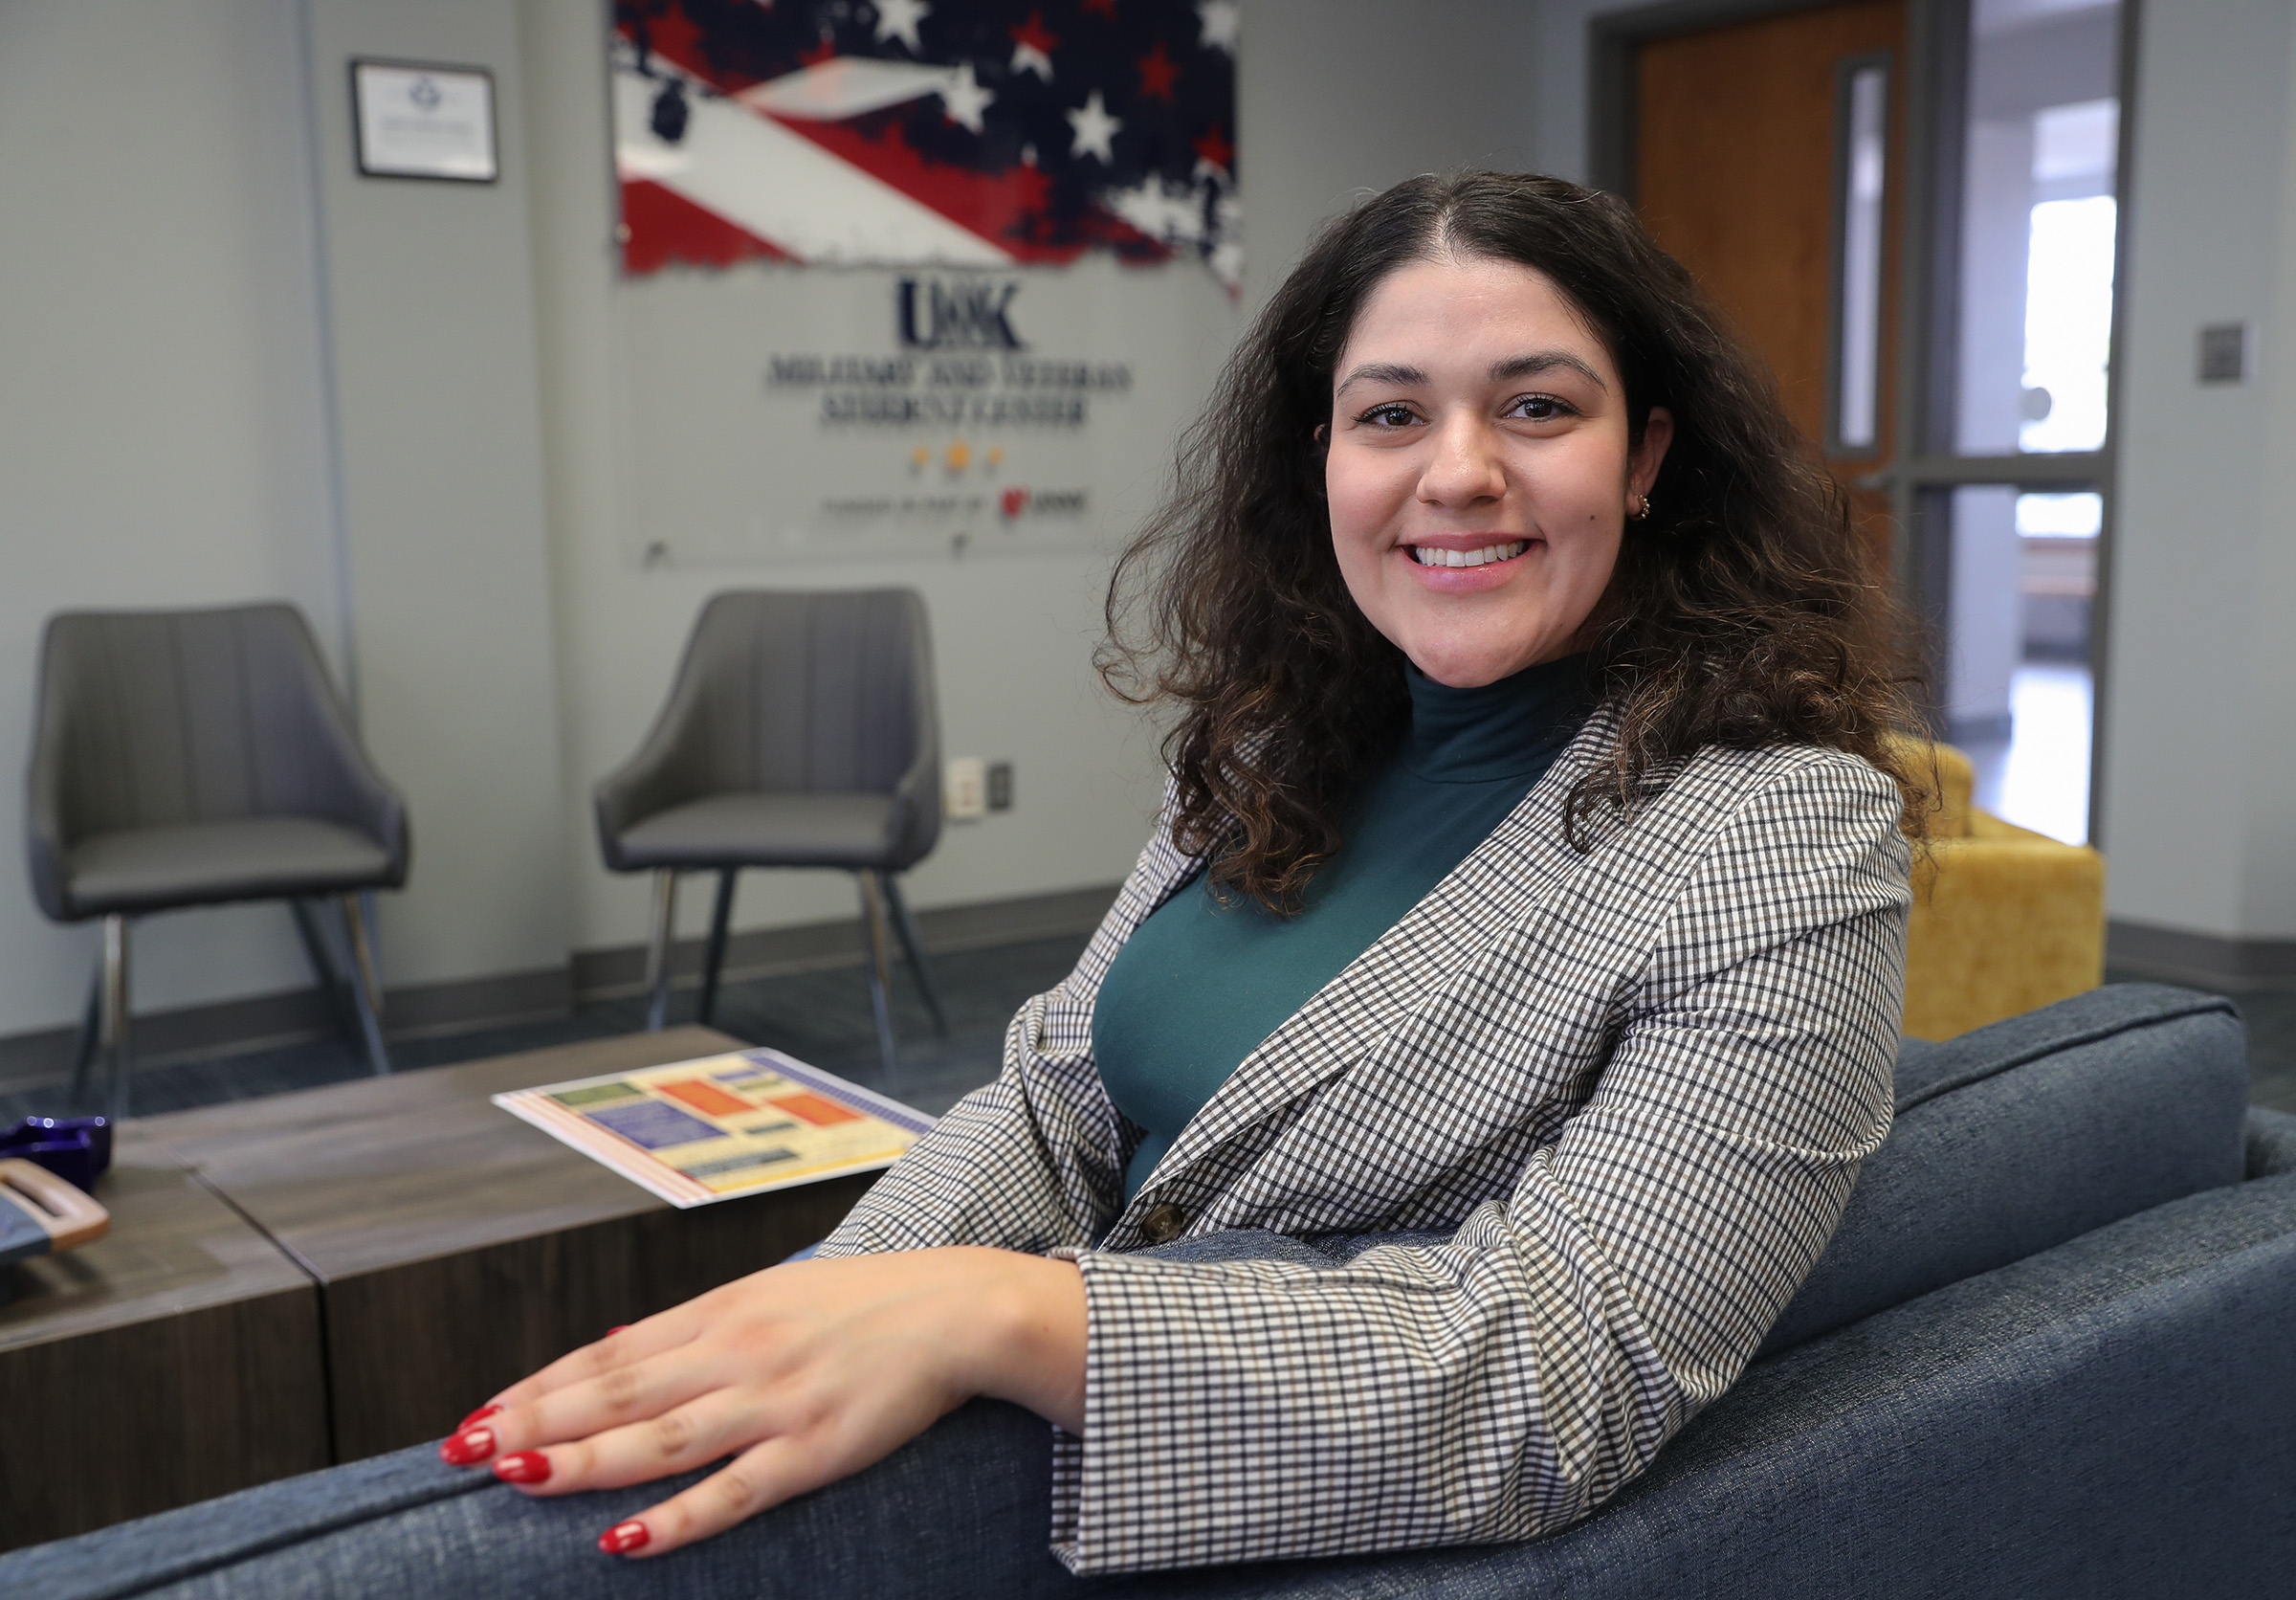 Tiffany Sauls is a senior at UNK, where she’s studying psychology with minors in criminal justice and behavioral and mental health. The former Marine wants to serve fellow veterans as a clinical mental health counselor.